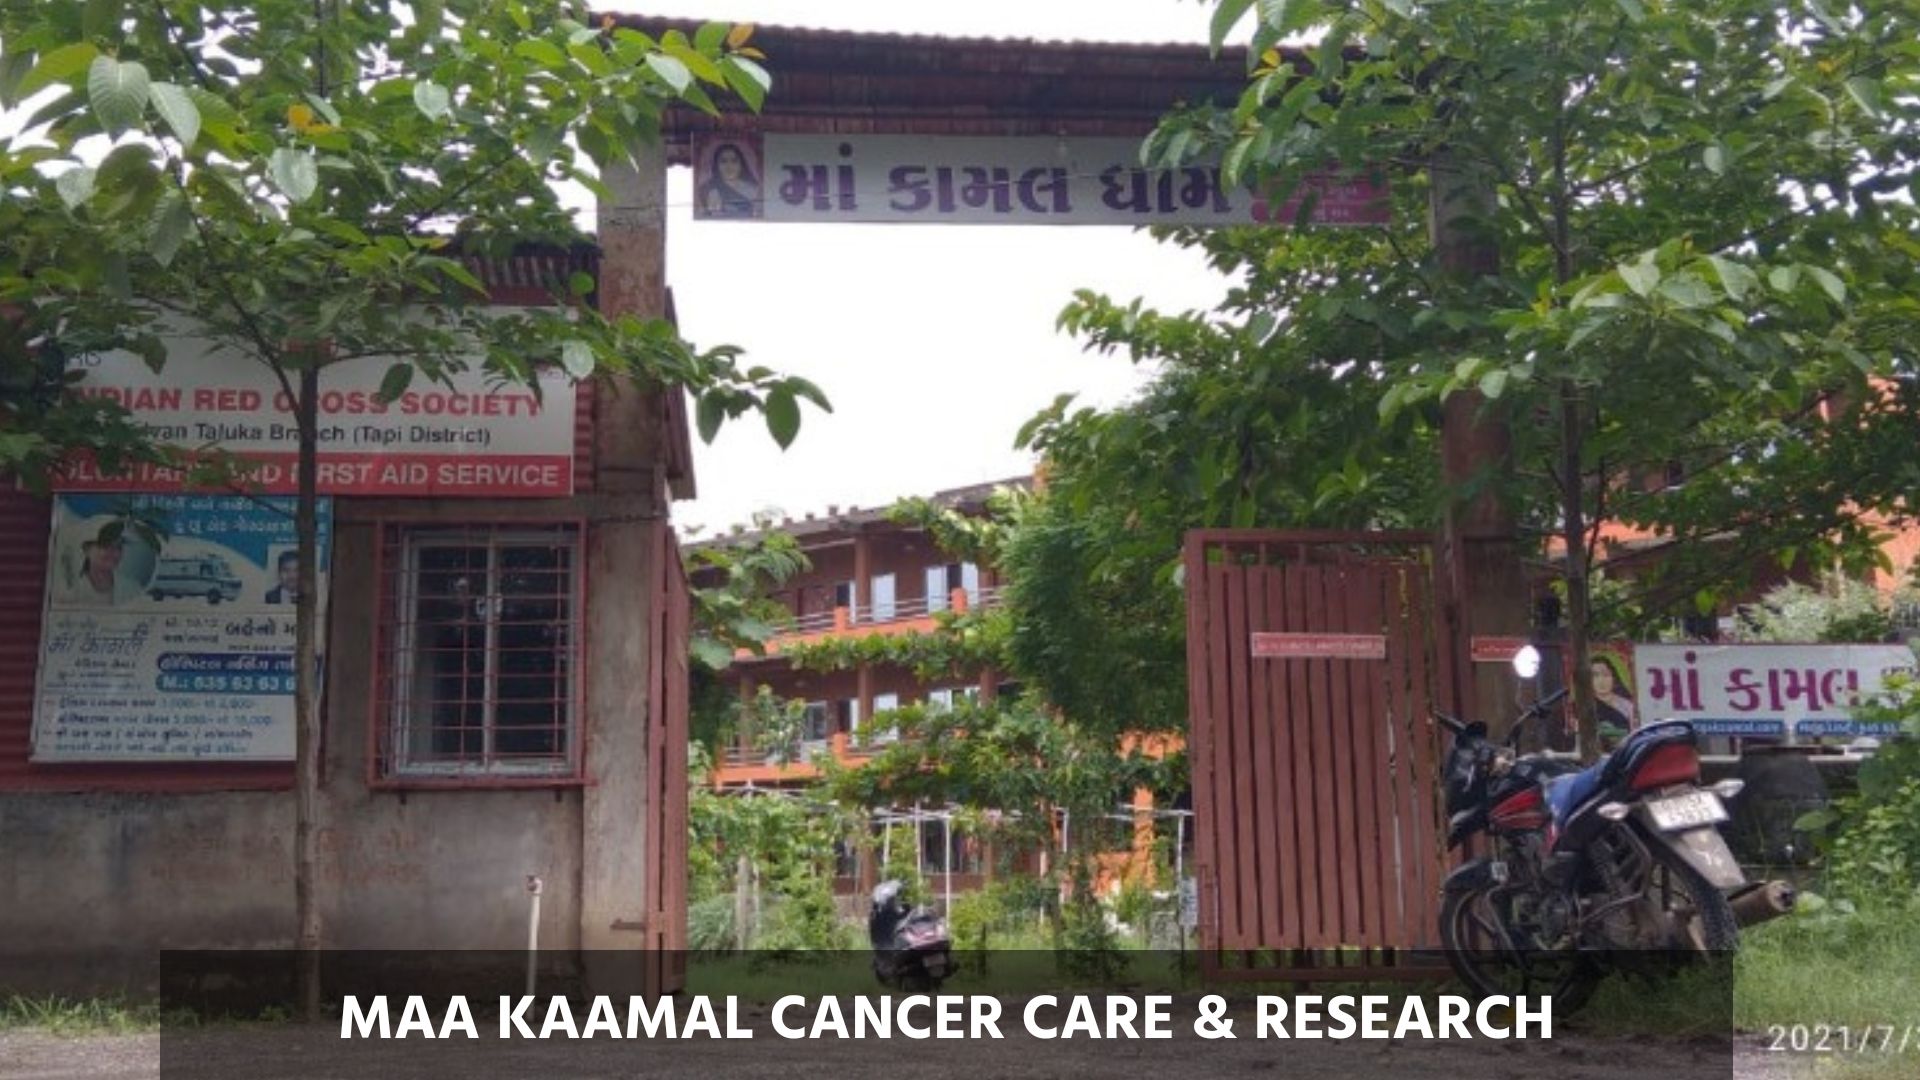 Maa Kaamal Cancer Care & Research Gate